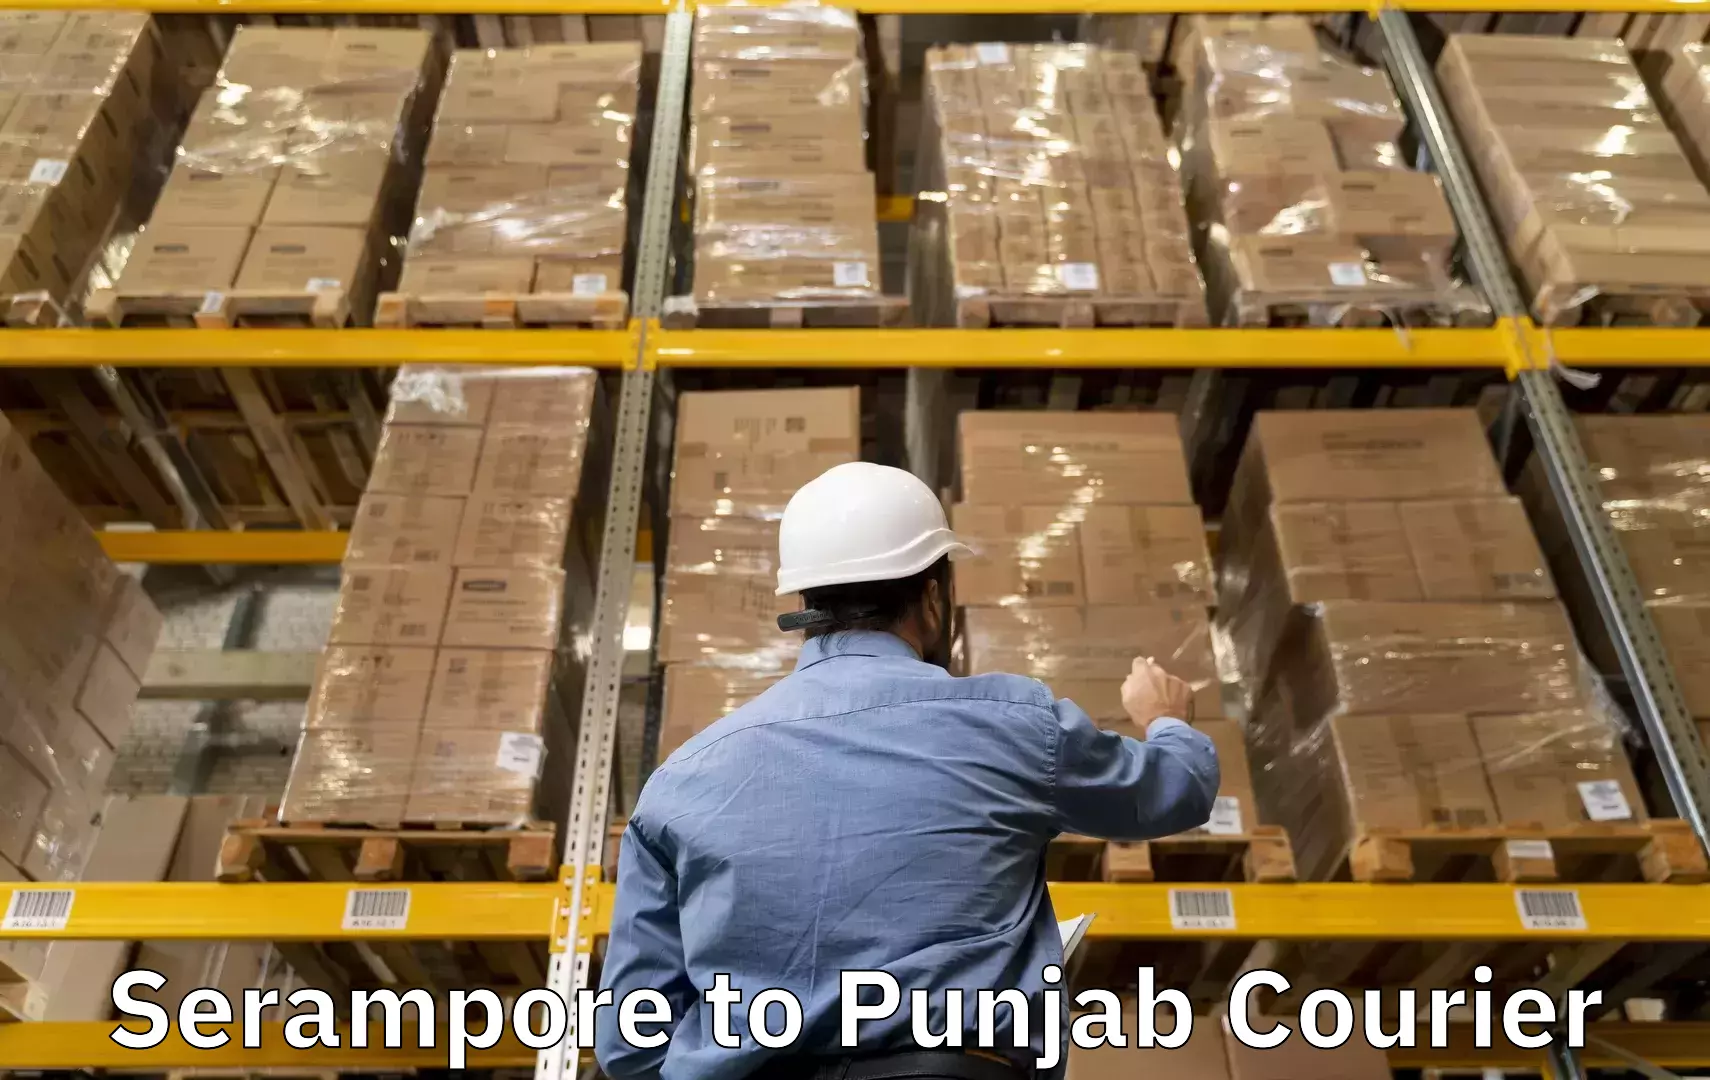 Luggage delivery providers Serampore to Punjab